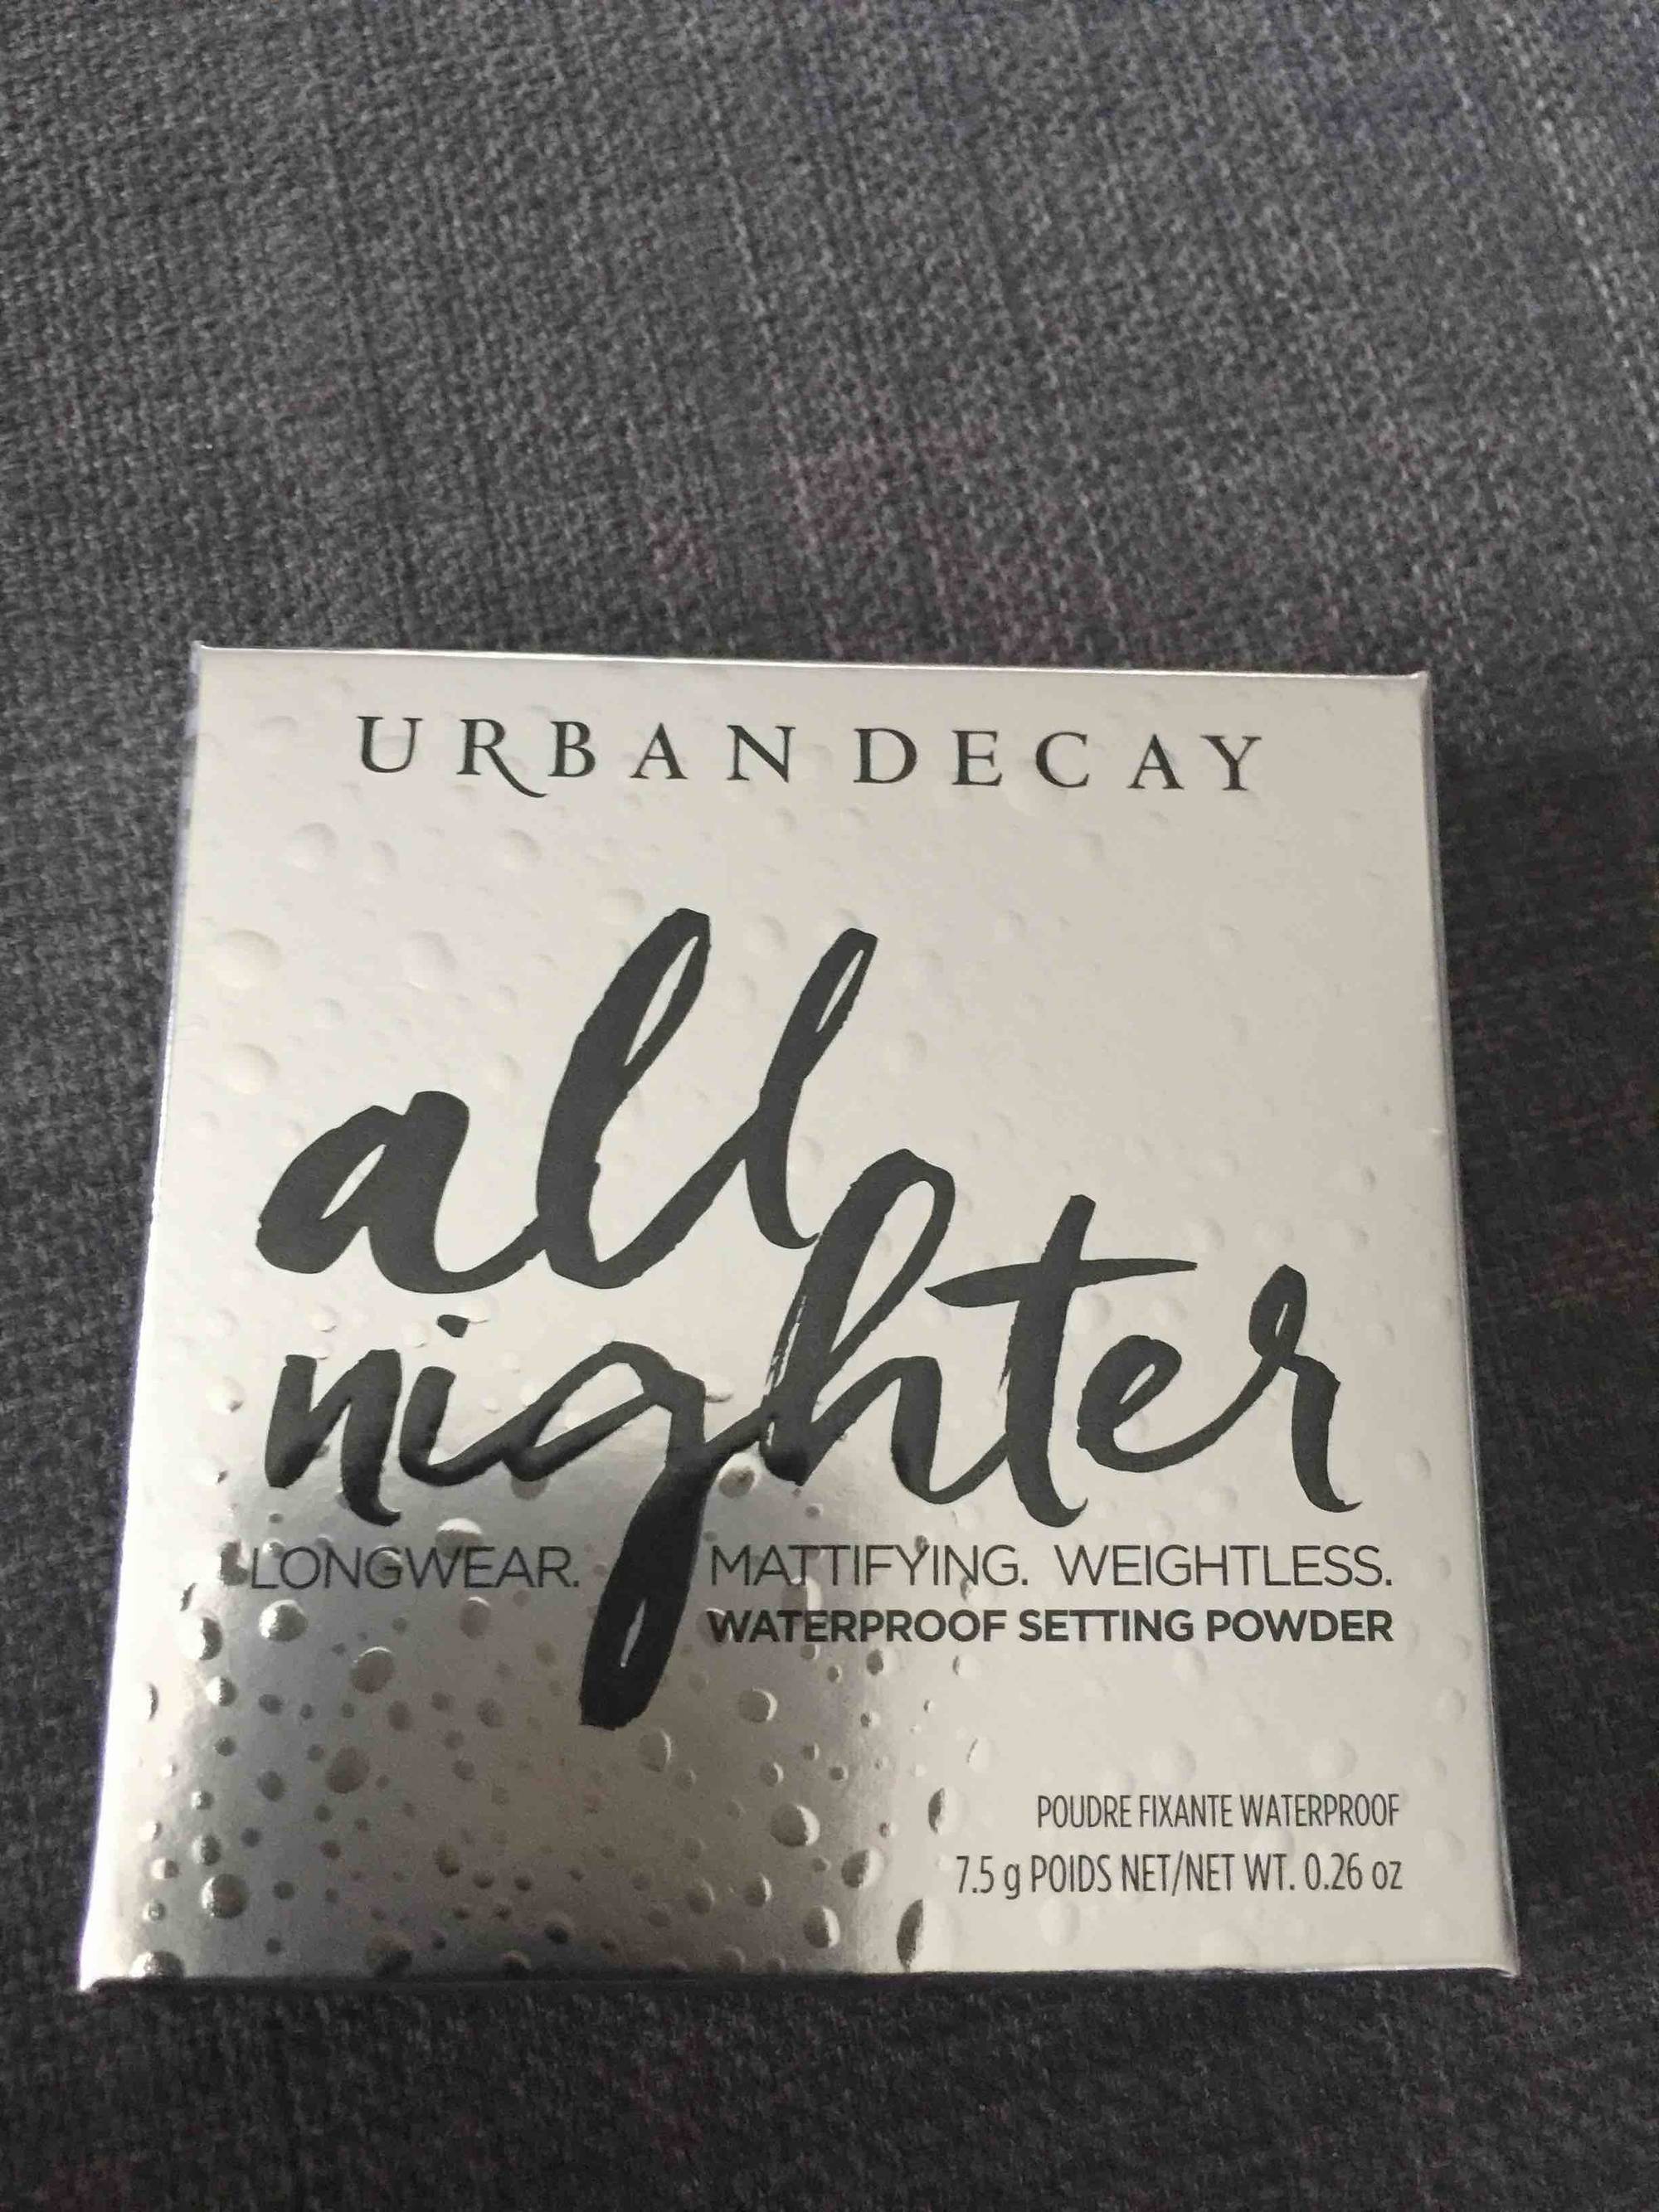 URBAN DECAY - All nighter - Poudre fixante waterproof